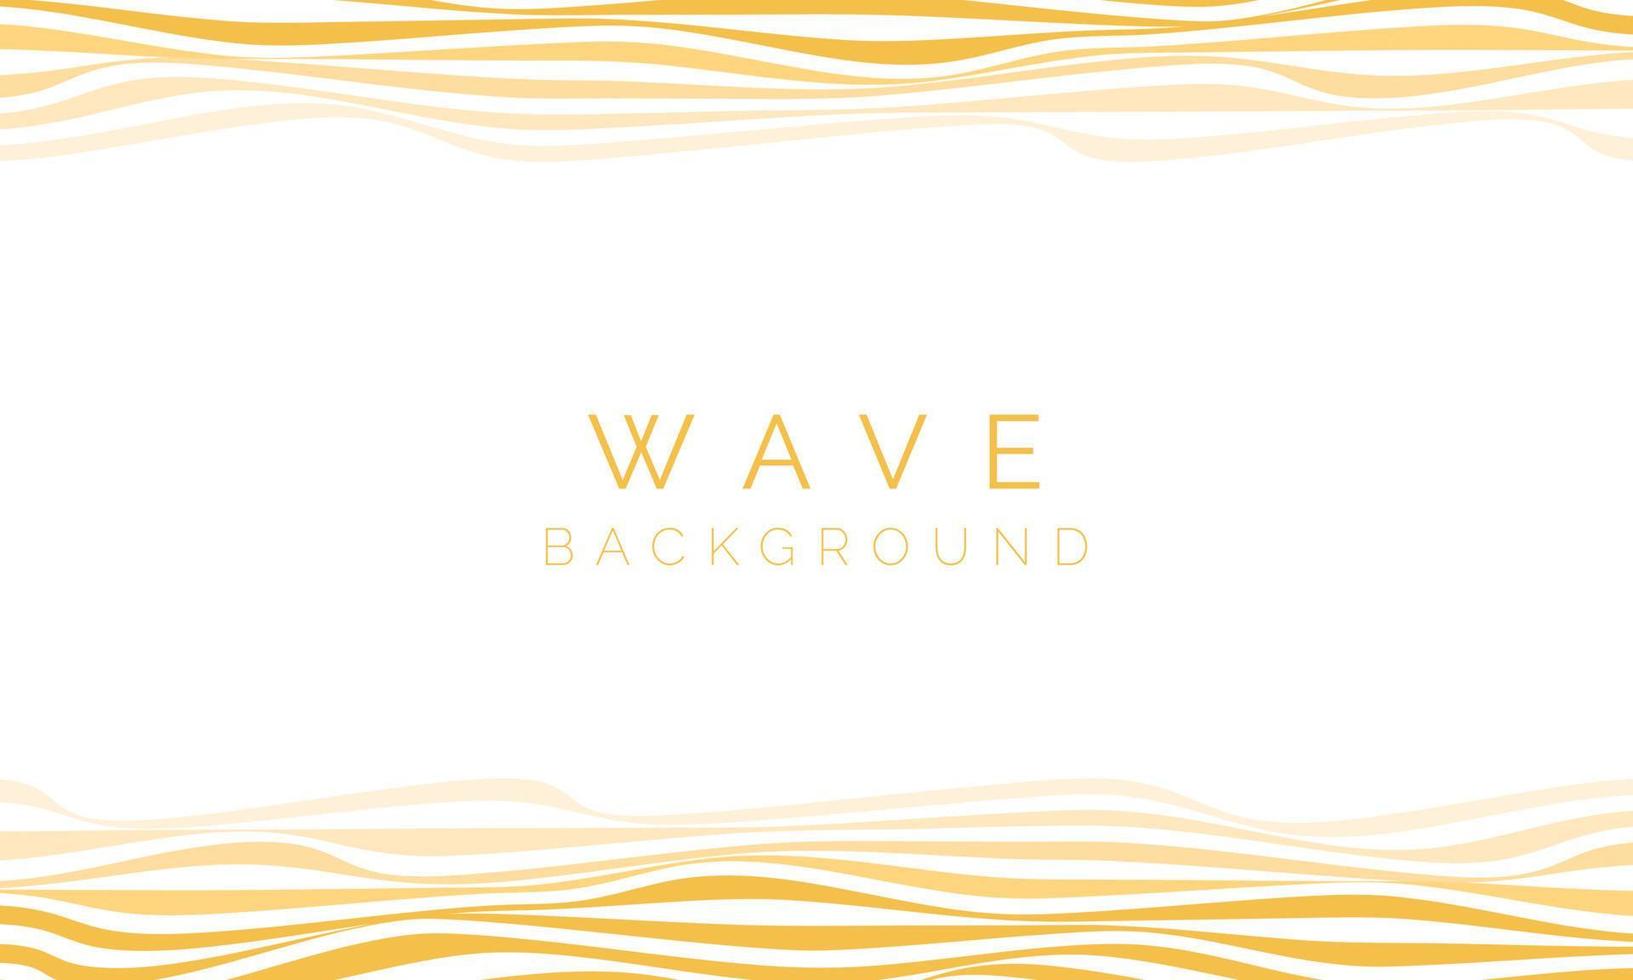 Background Abstract Wave Vector Design